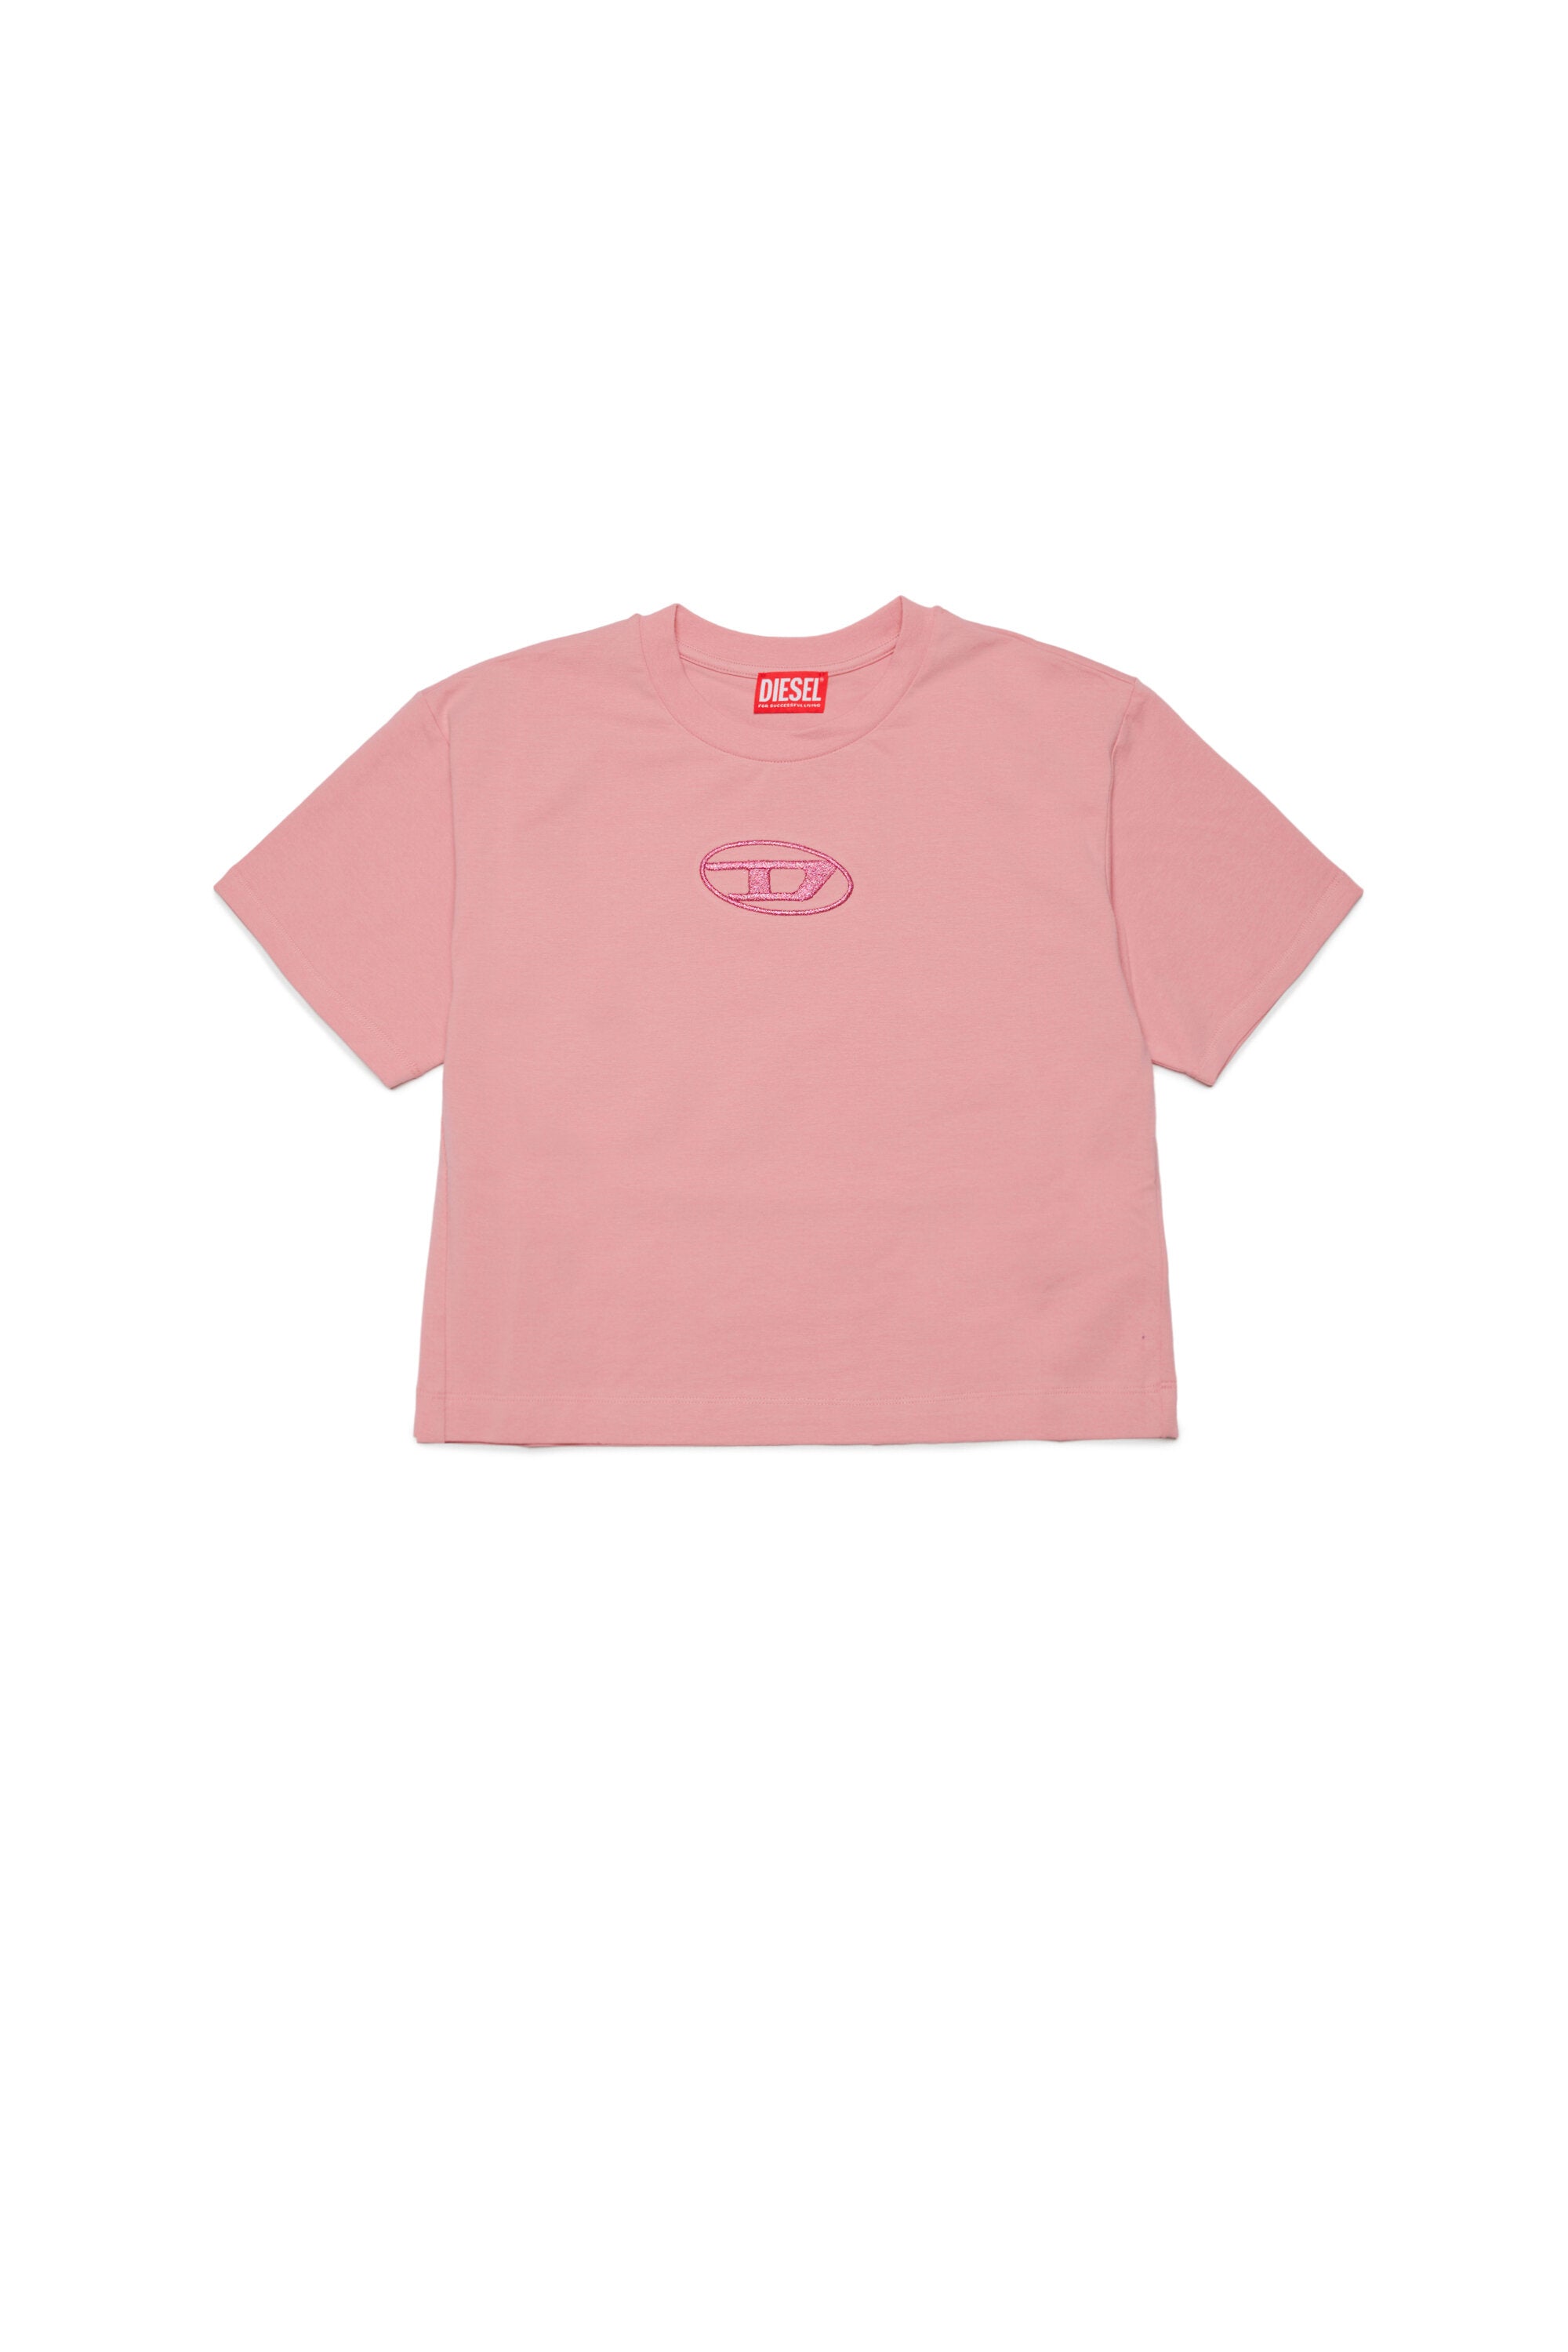 Oversize crew-neck jersey T-shirt with Oval D logo